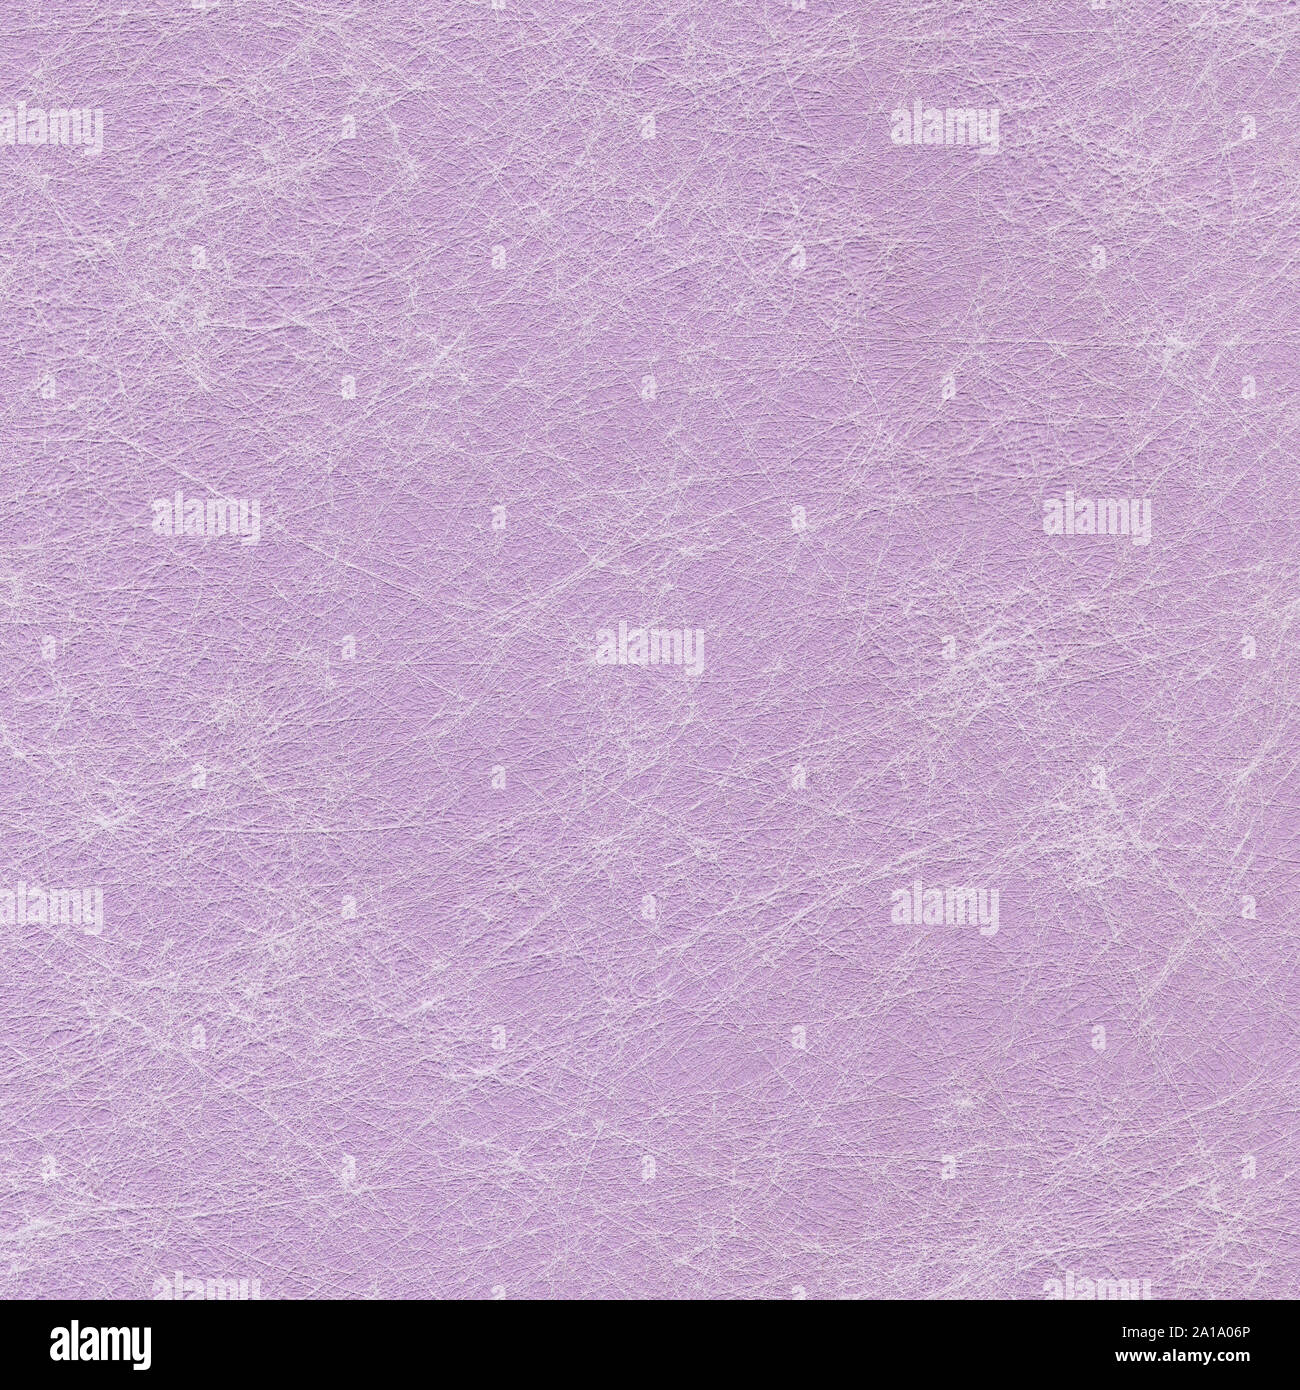 Lilac paper background with white pattern Stock Photo